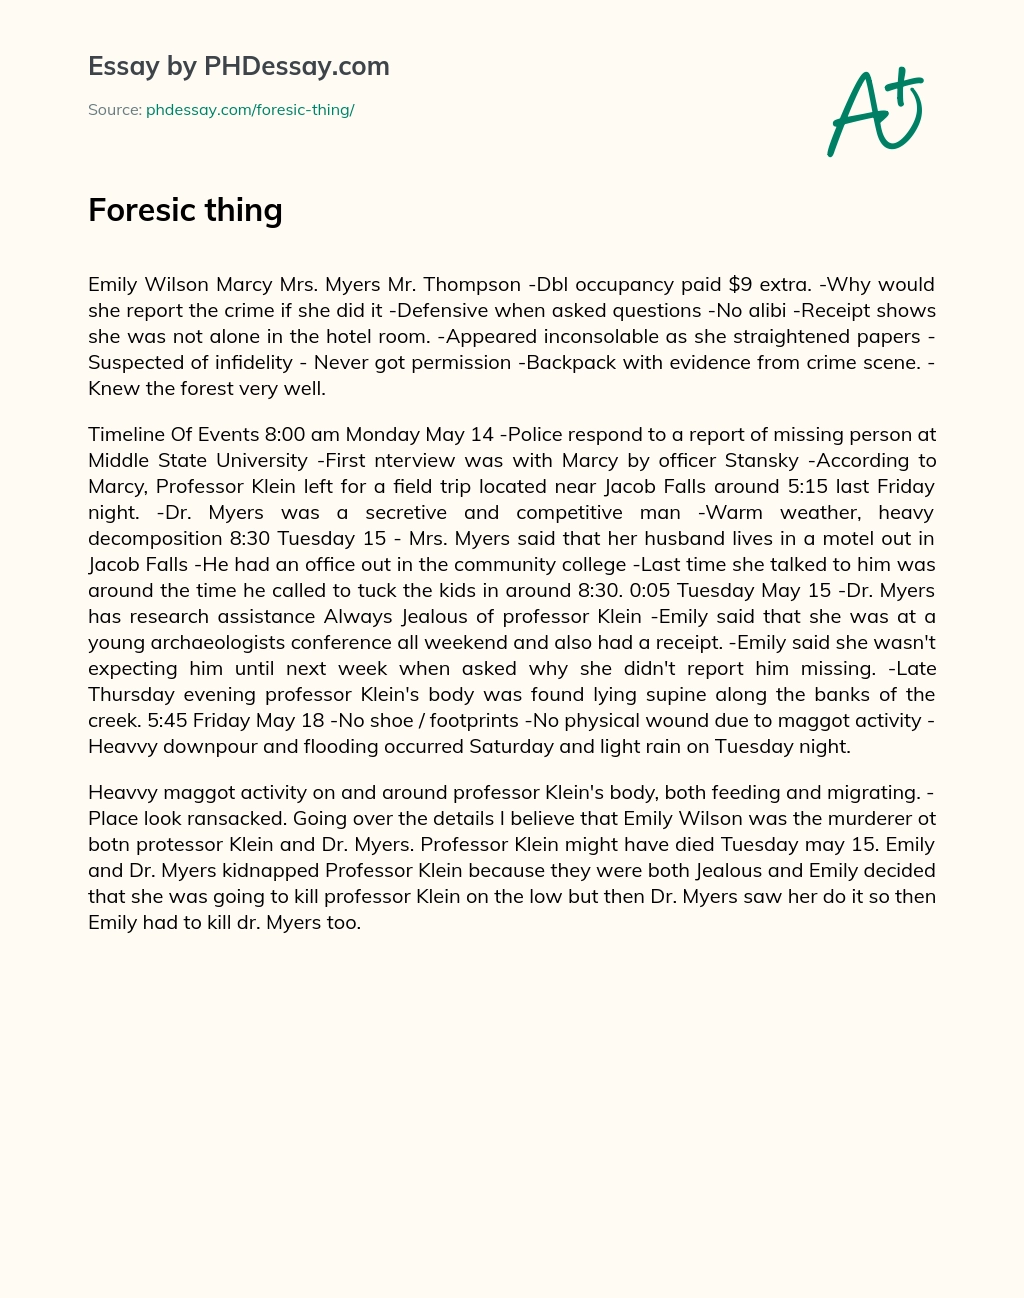 Foresic thing essay